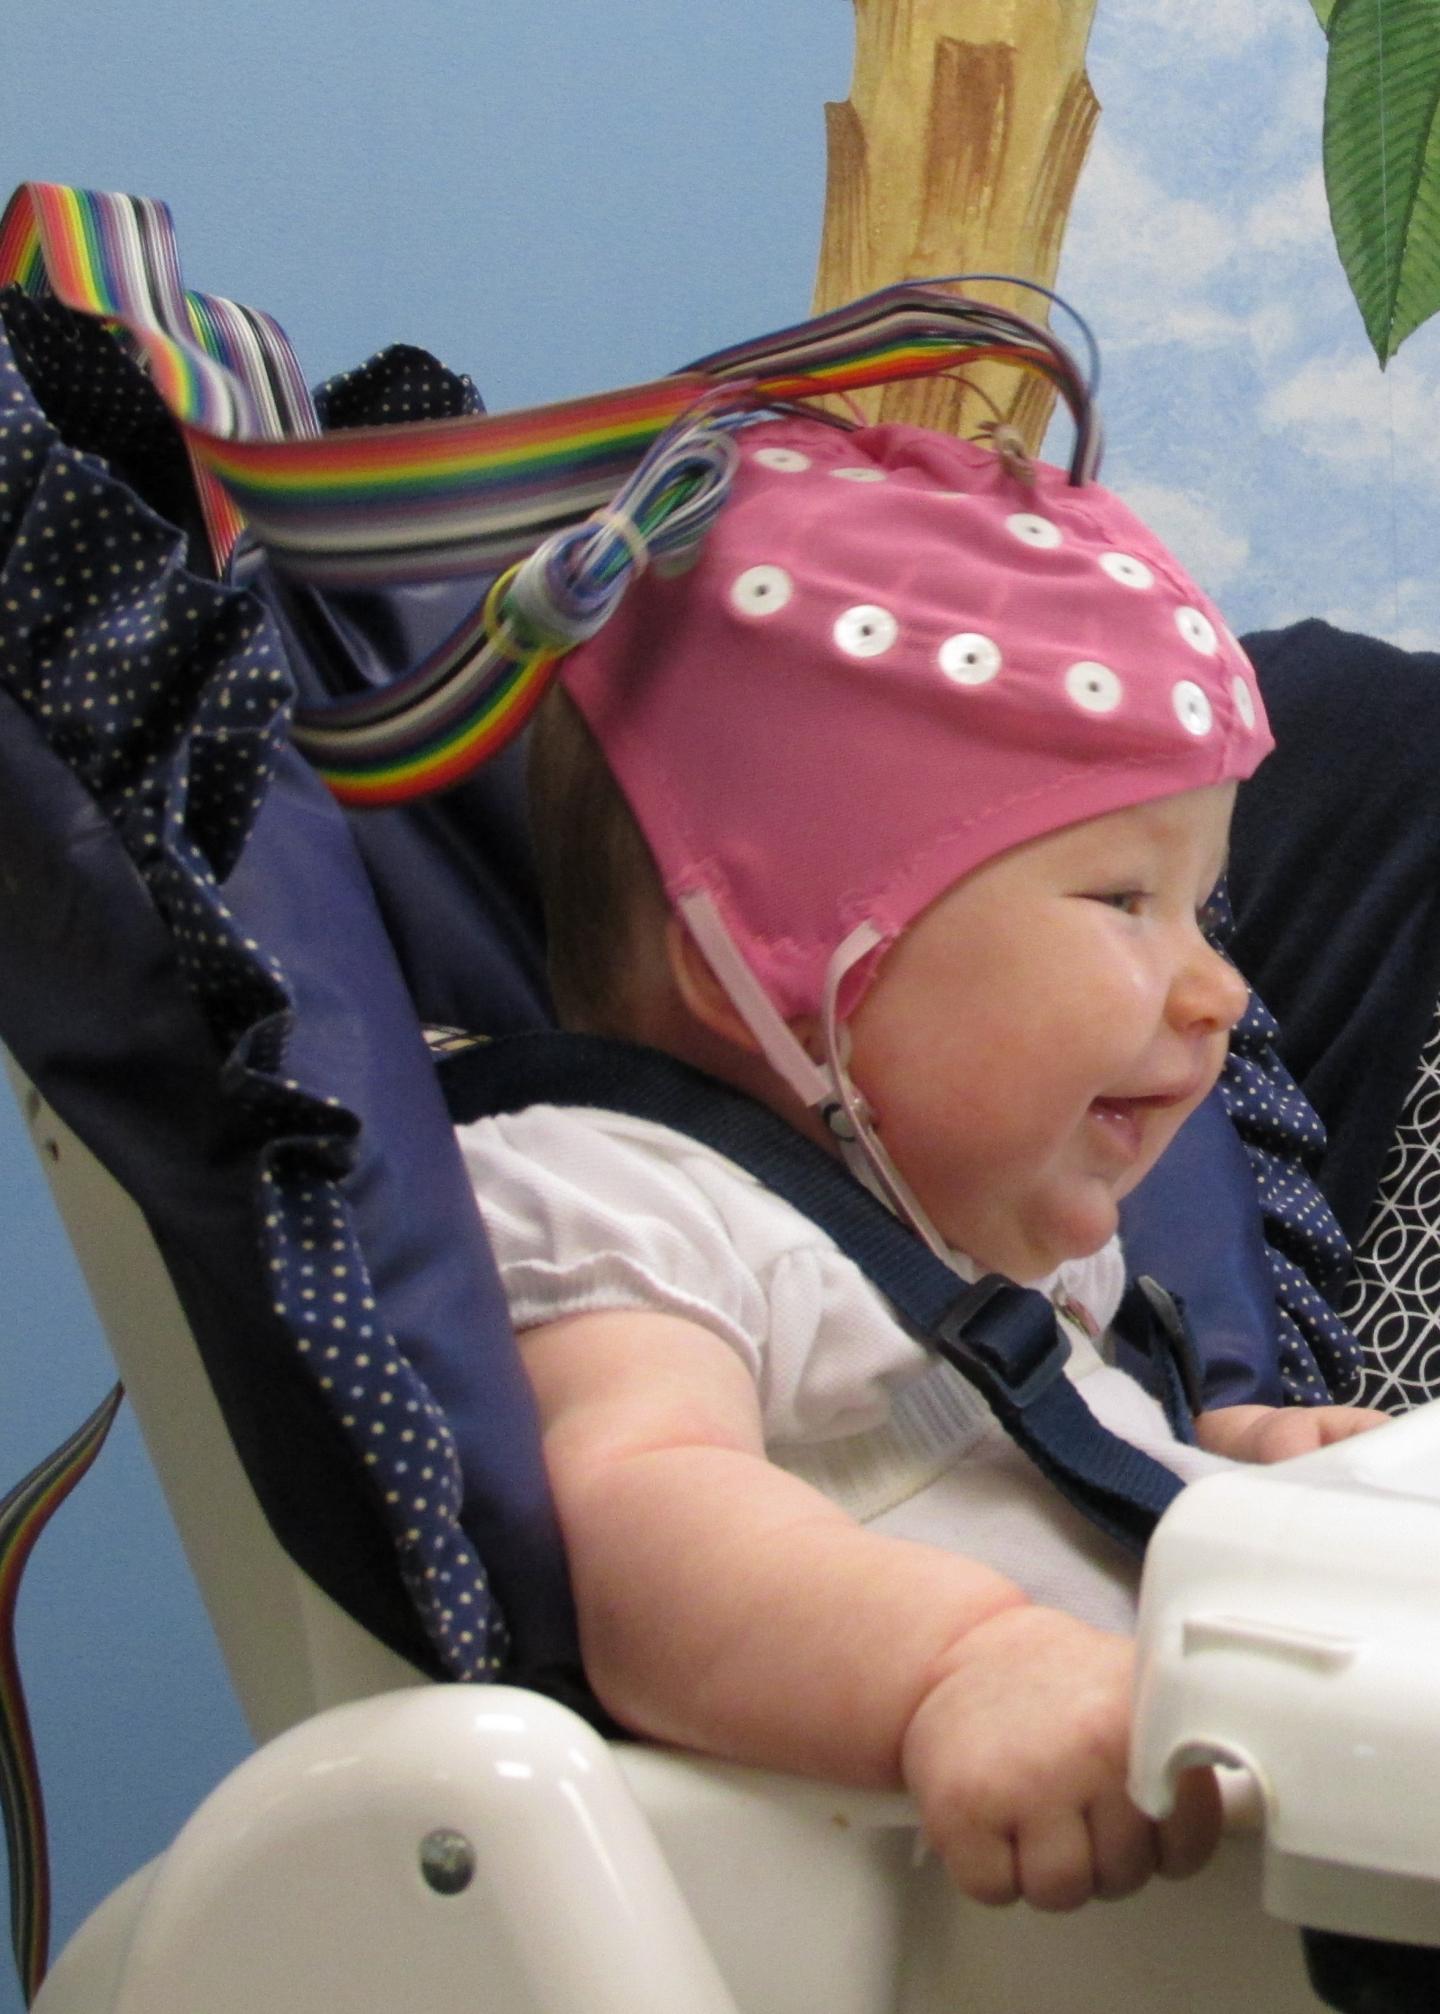 EEG Patterns Shift as Result of Feeding Method and Affectionate Touch in Depressed and Non-depressed Mothers and Their Babies